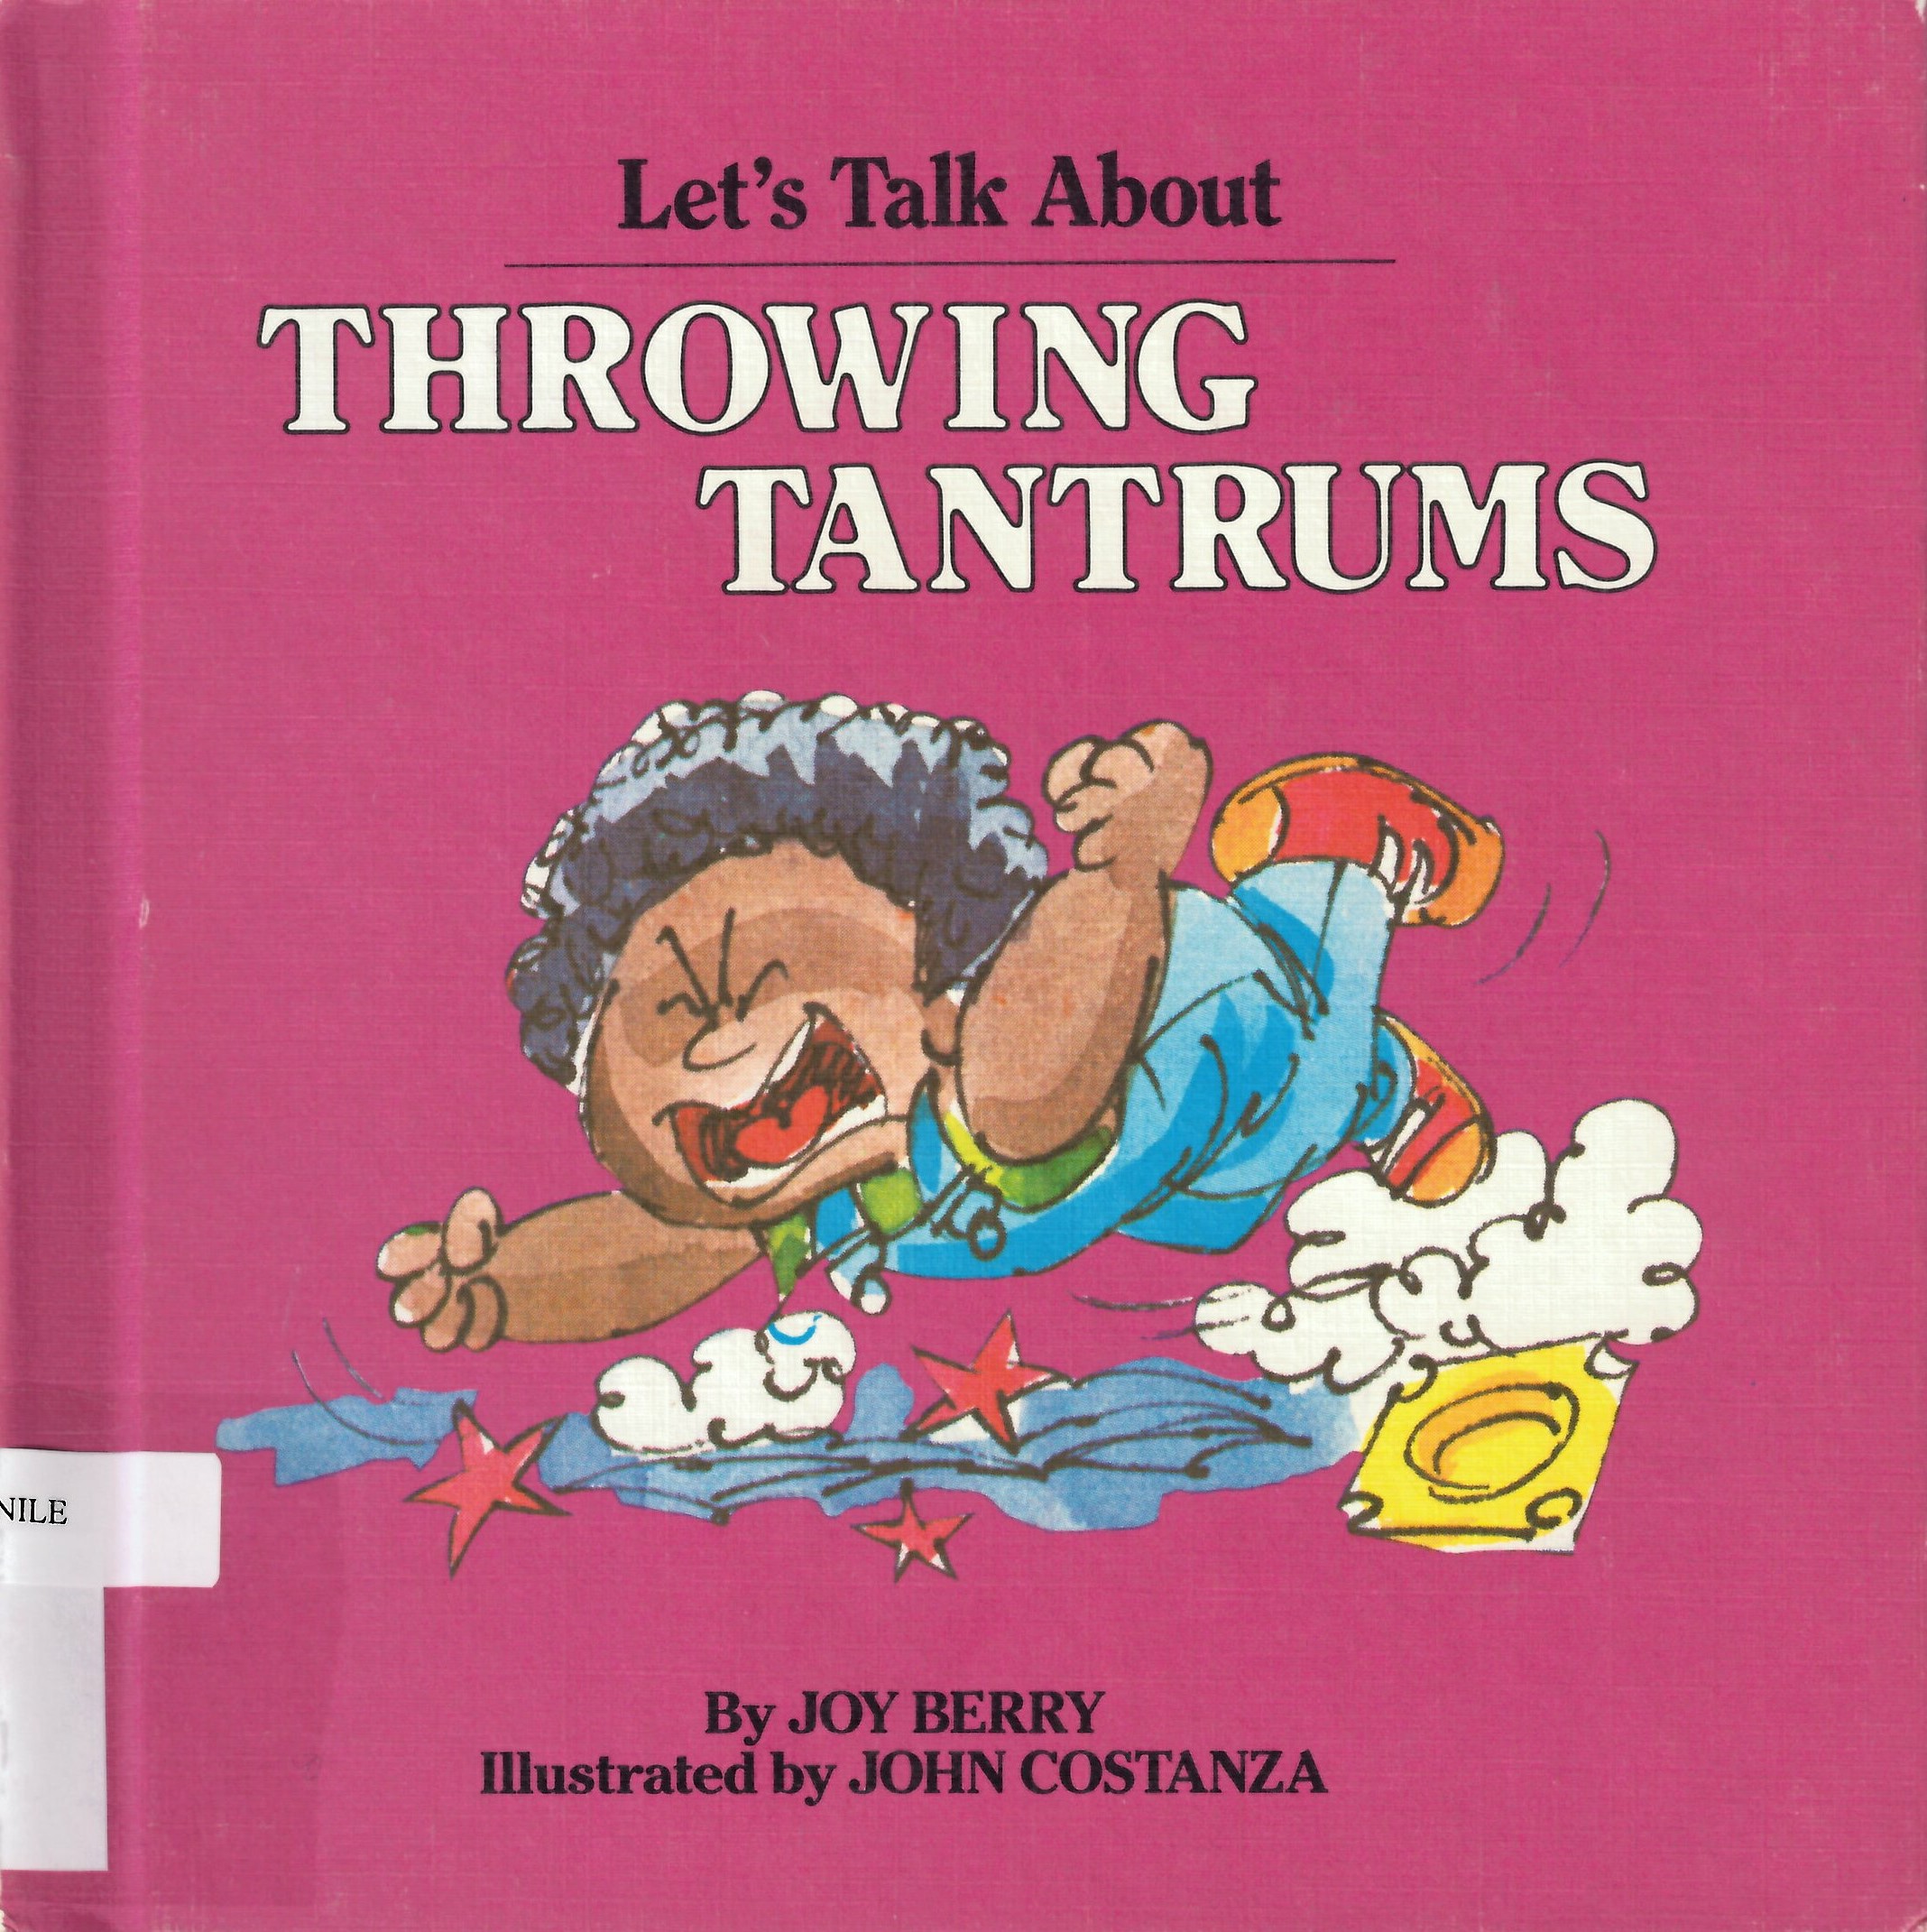 Let's talk about throwing tantrums